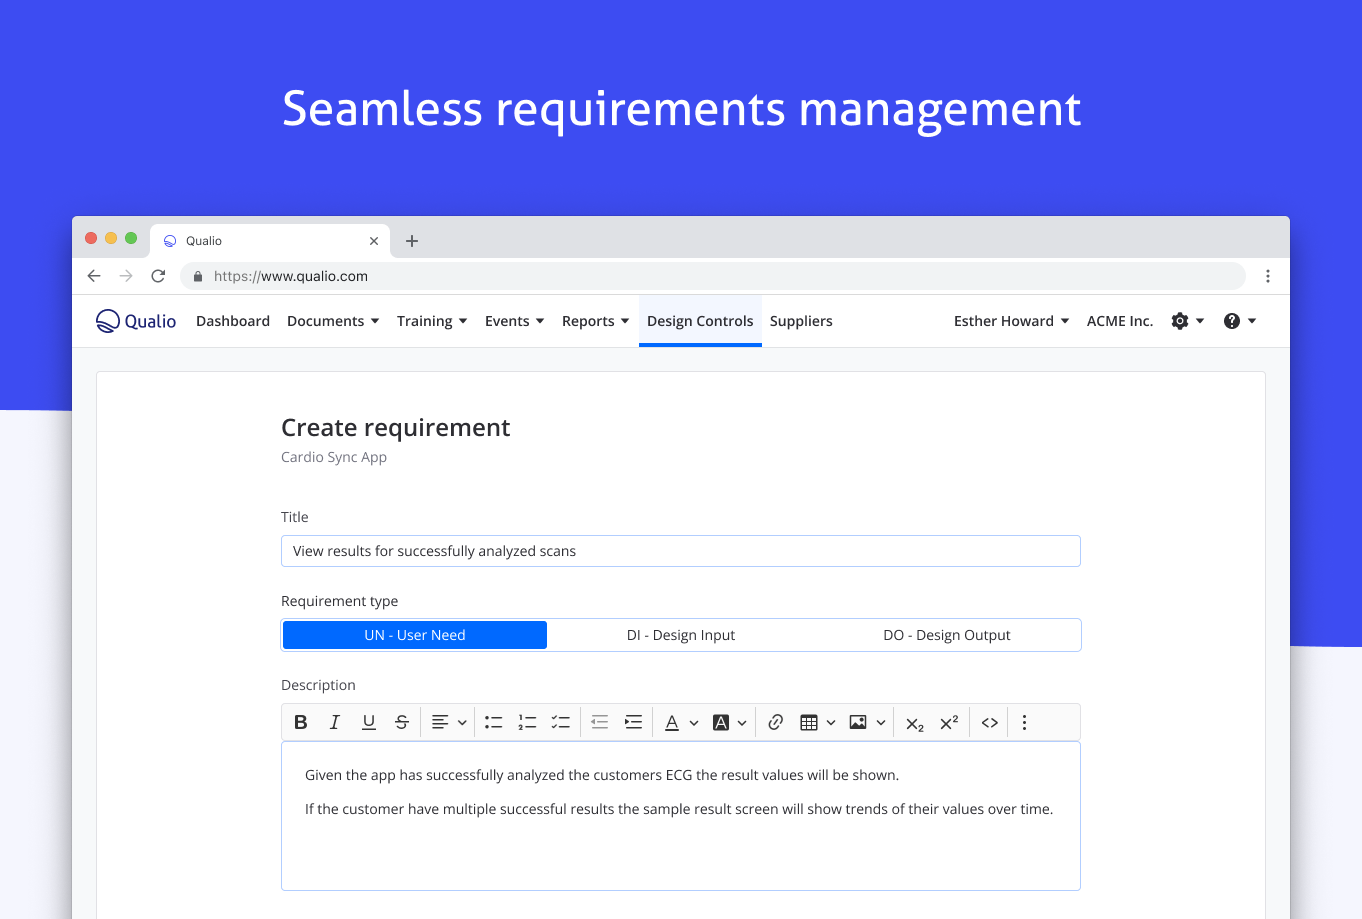 Qualio Software - Seamless requirements management